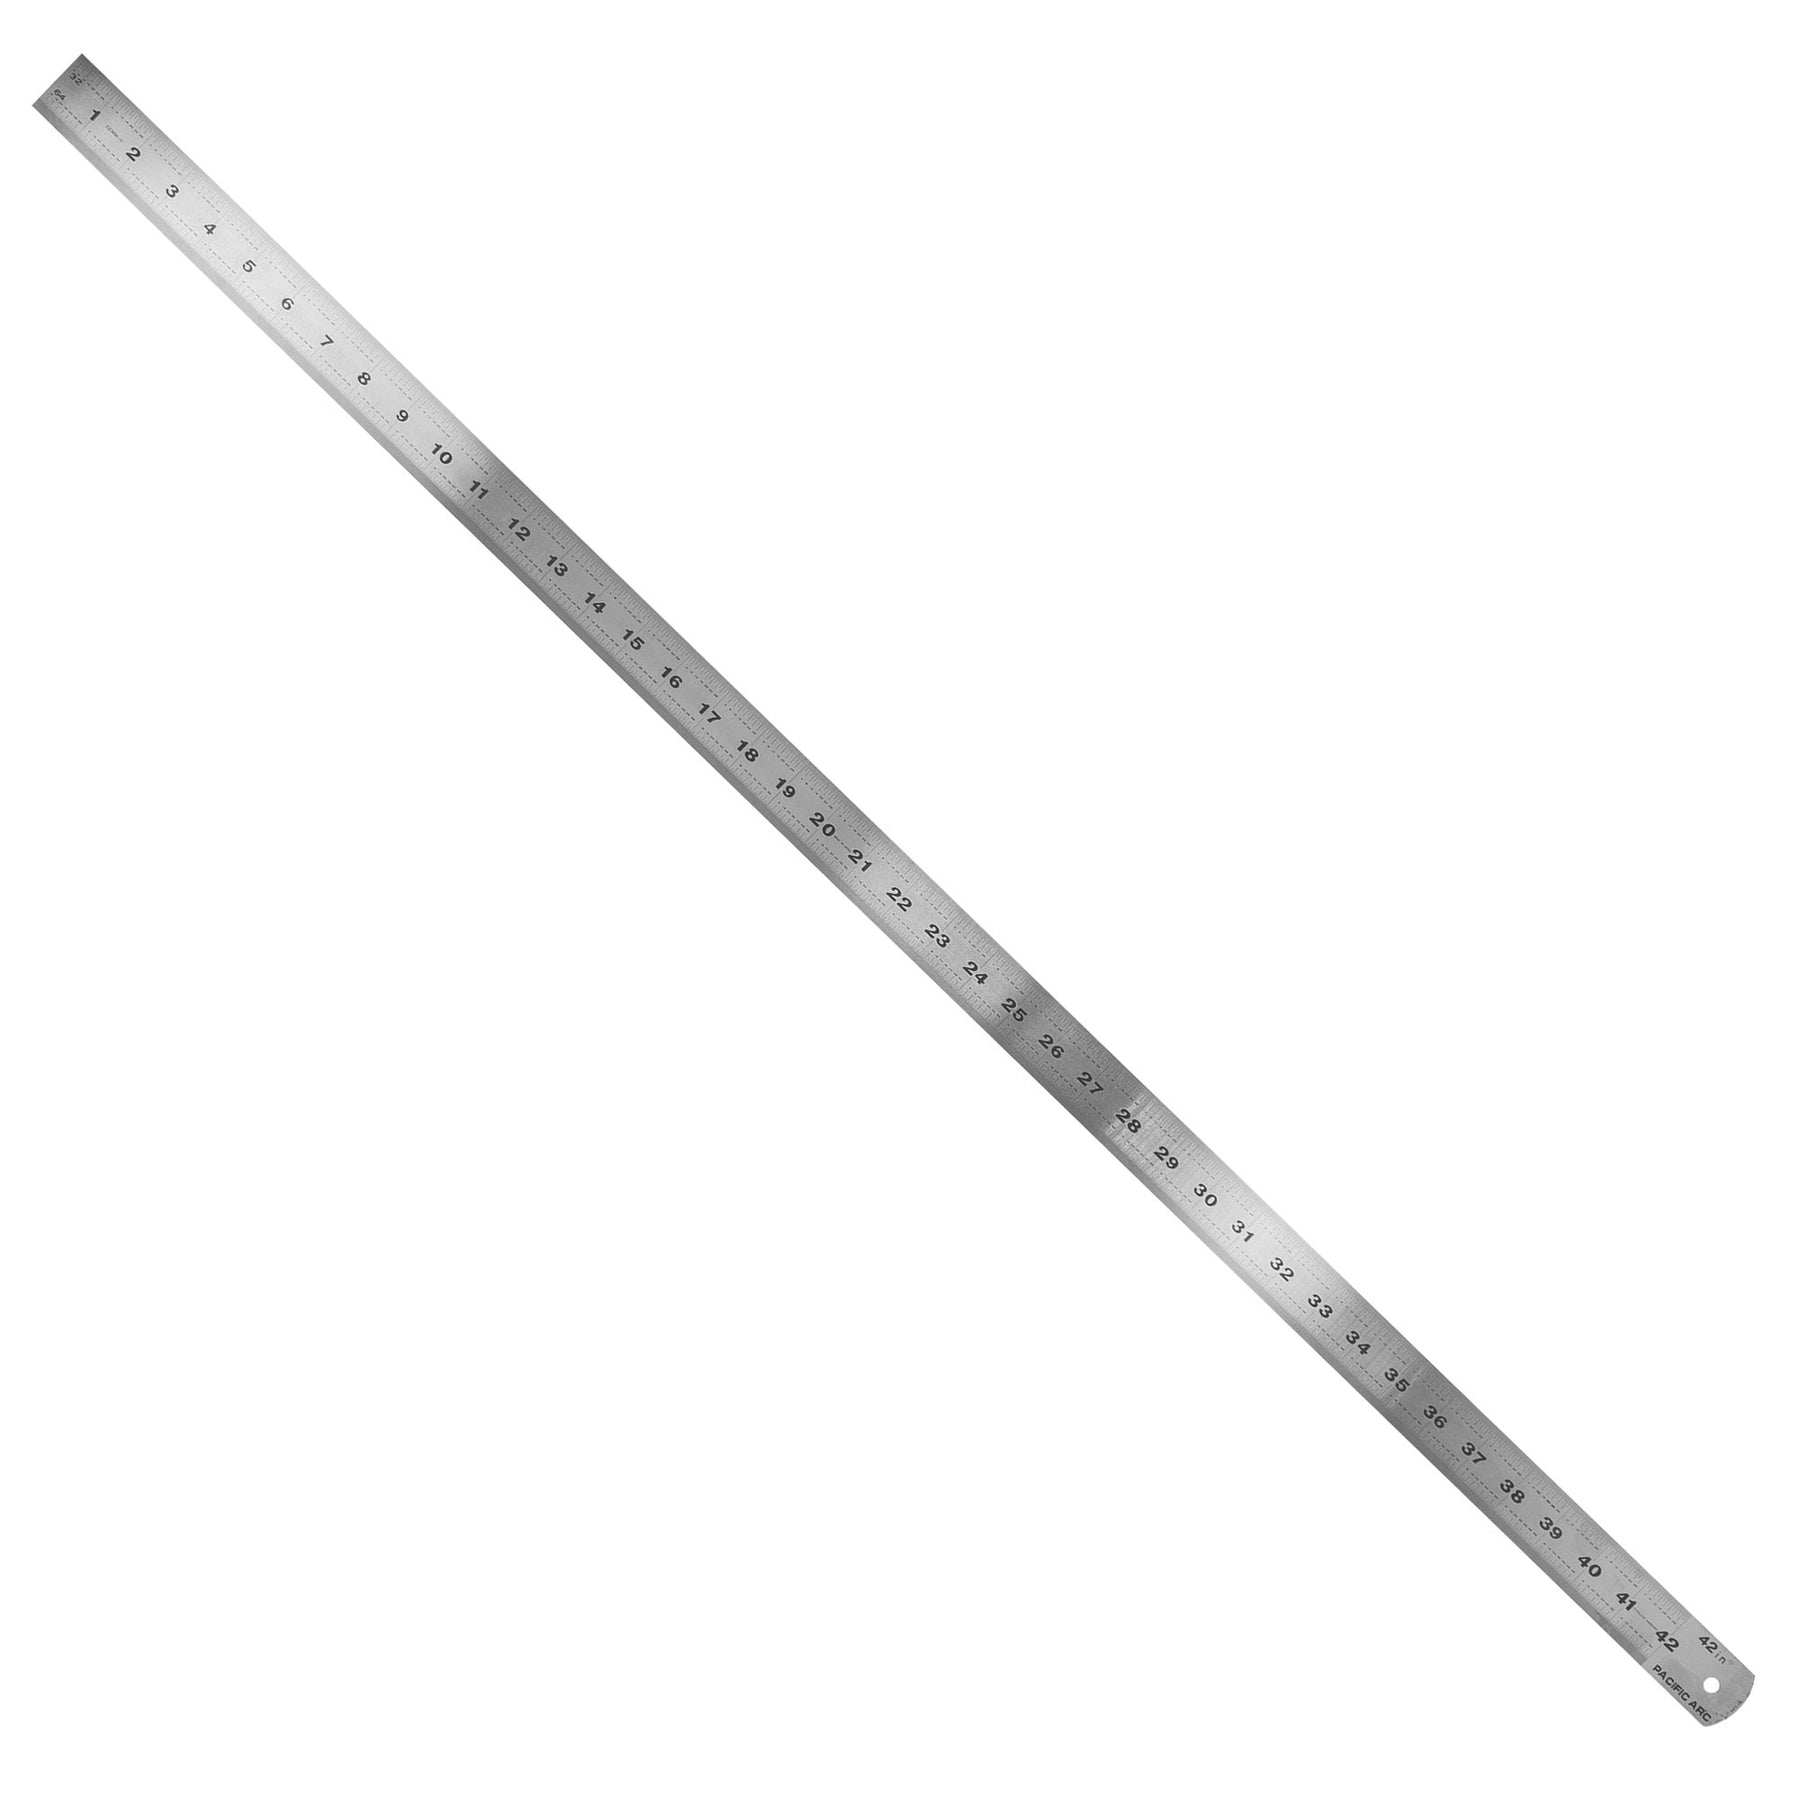 Pacific Arc ME24 Stainless Steel Corkback Ruler inch / Metric 24 inch